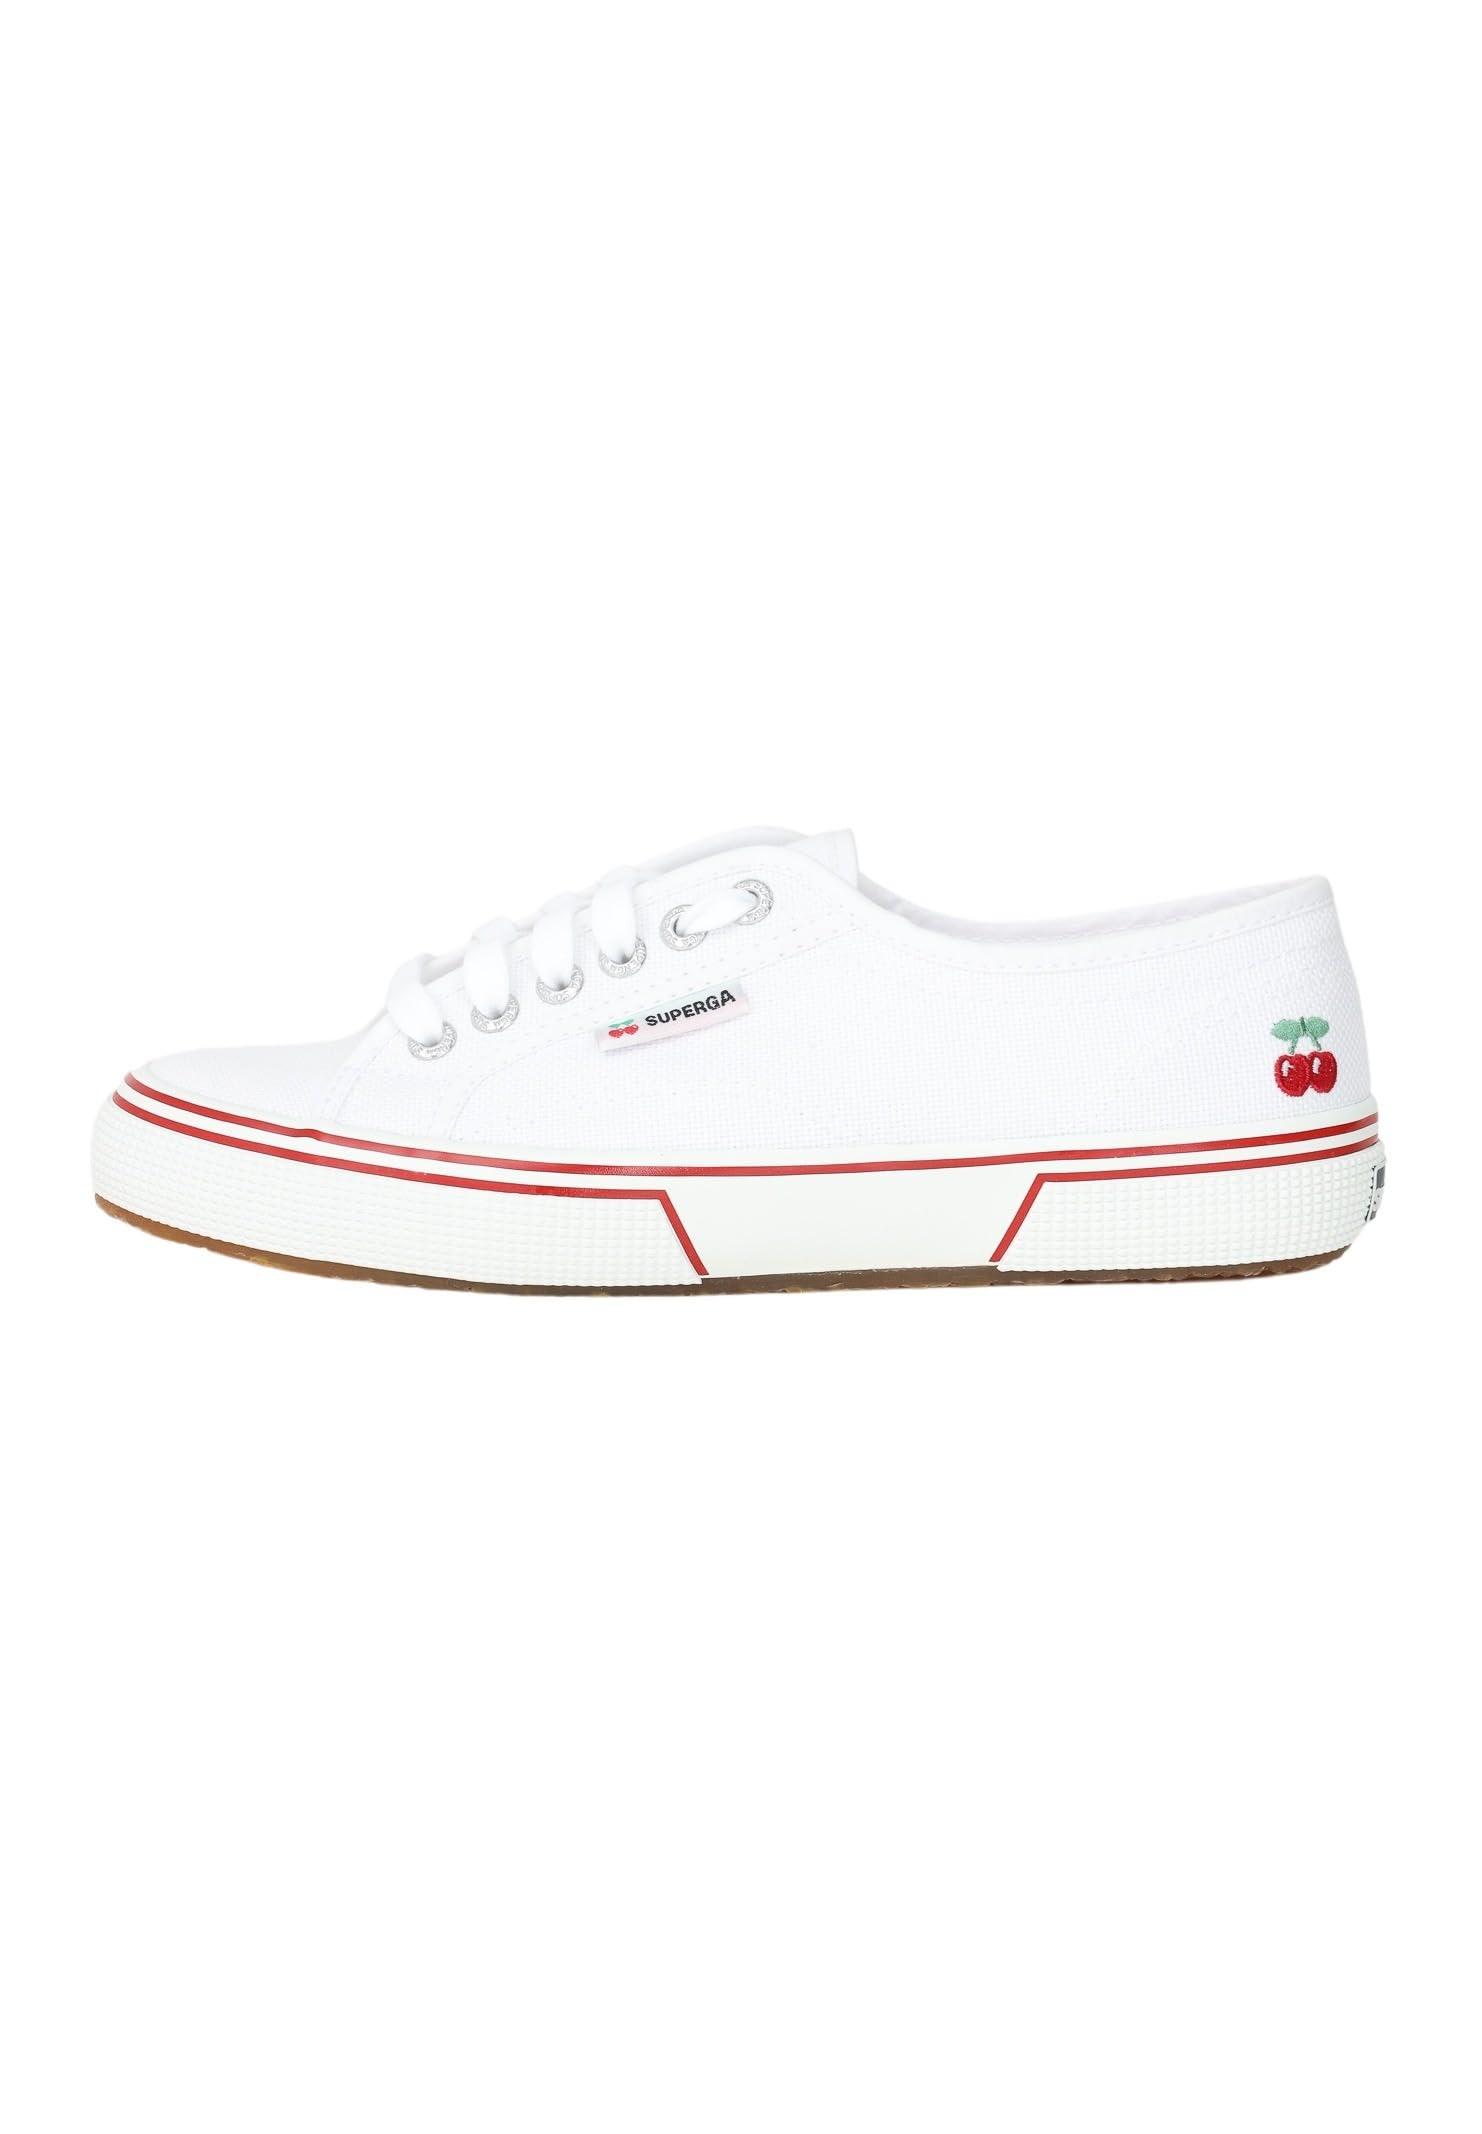 Superga White Casual Sneakers In Collaboration With Pacha | Lyst UK